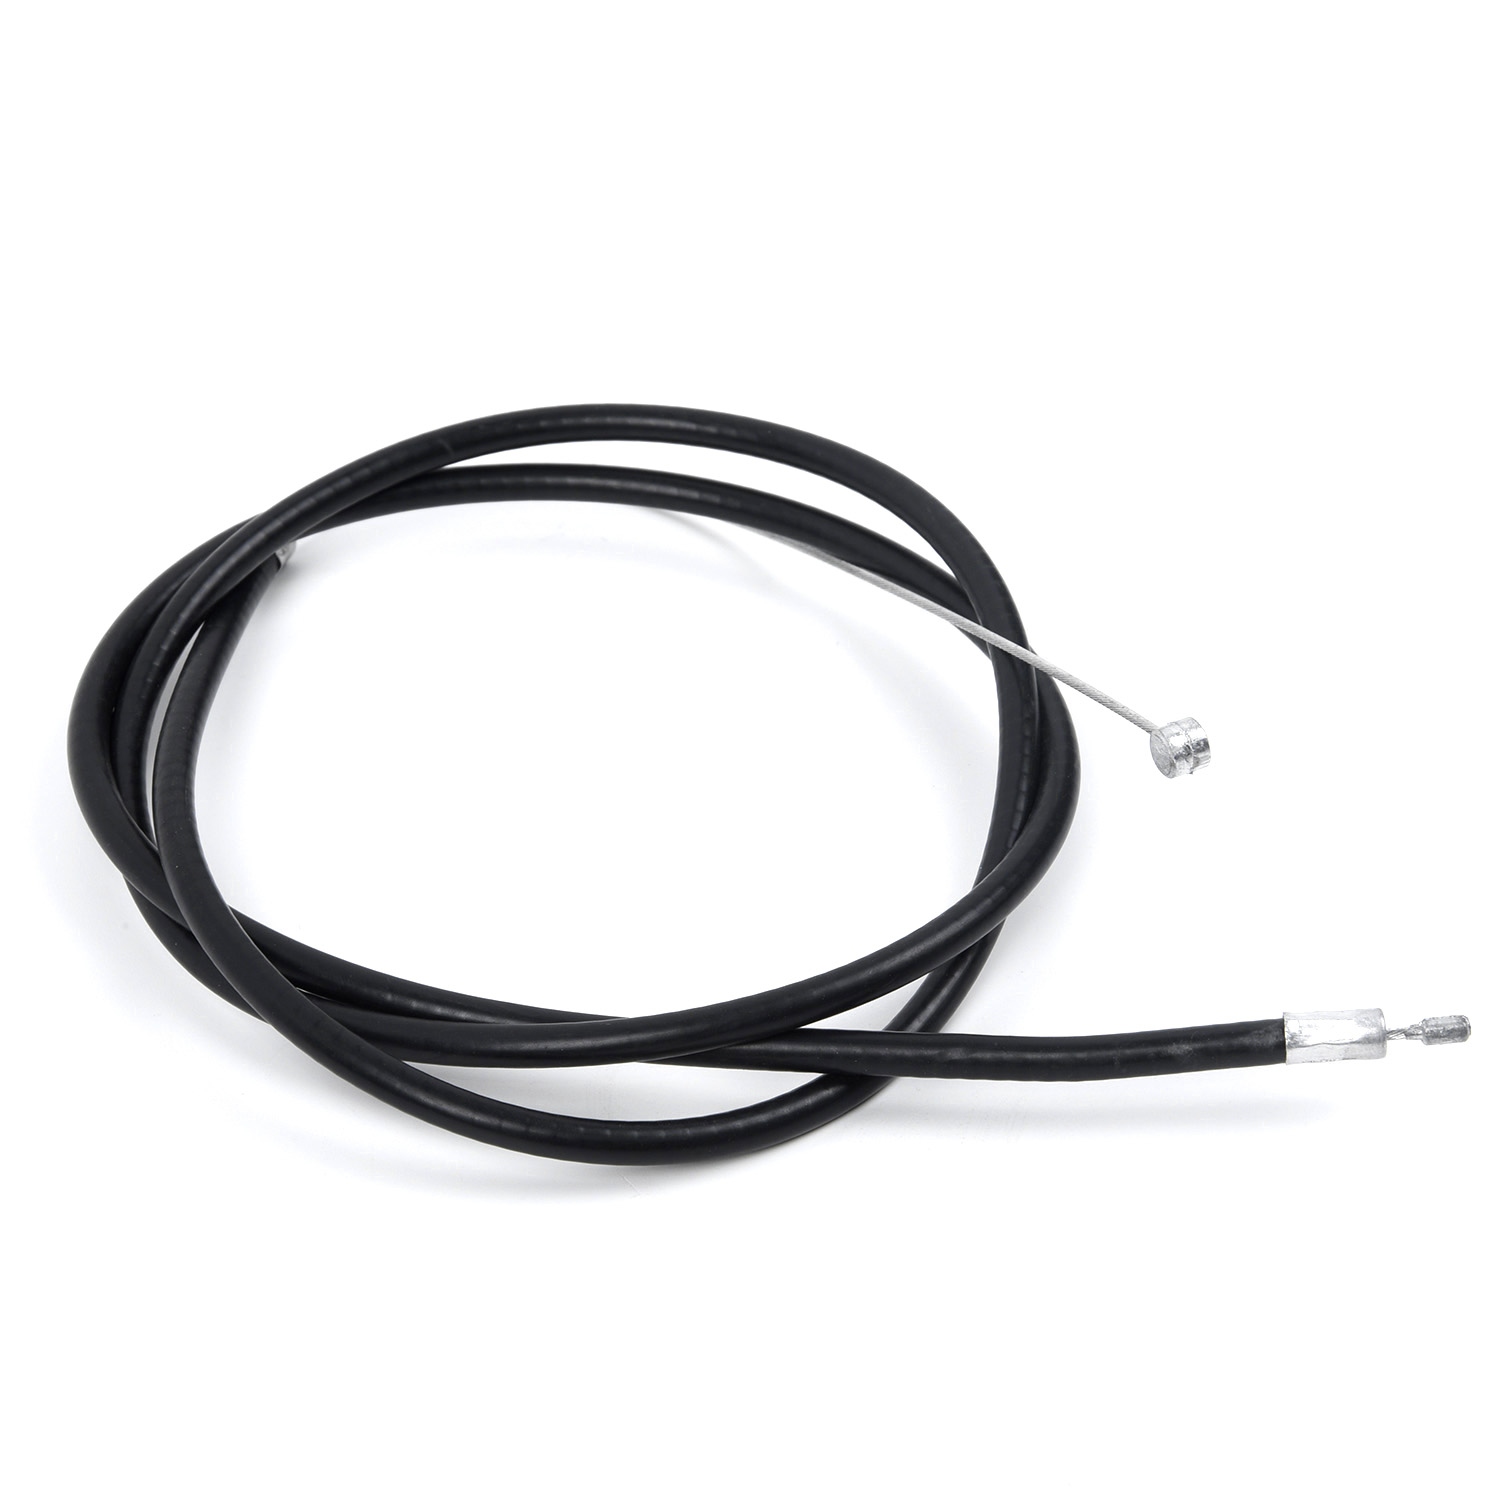 90cm String Trimmer Throttle Cable For Stihl KA85R KW85 HT70 HT70K HT75 FS75 FS80 FS80R FS85 FS85R Garden Power Tools